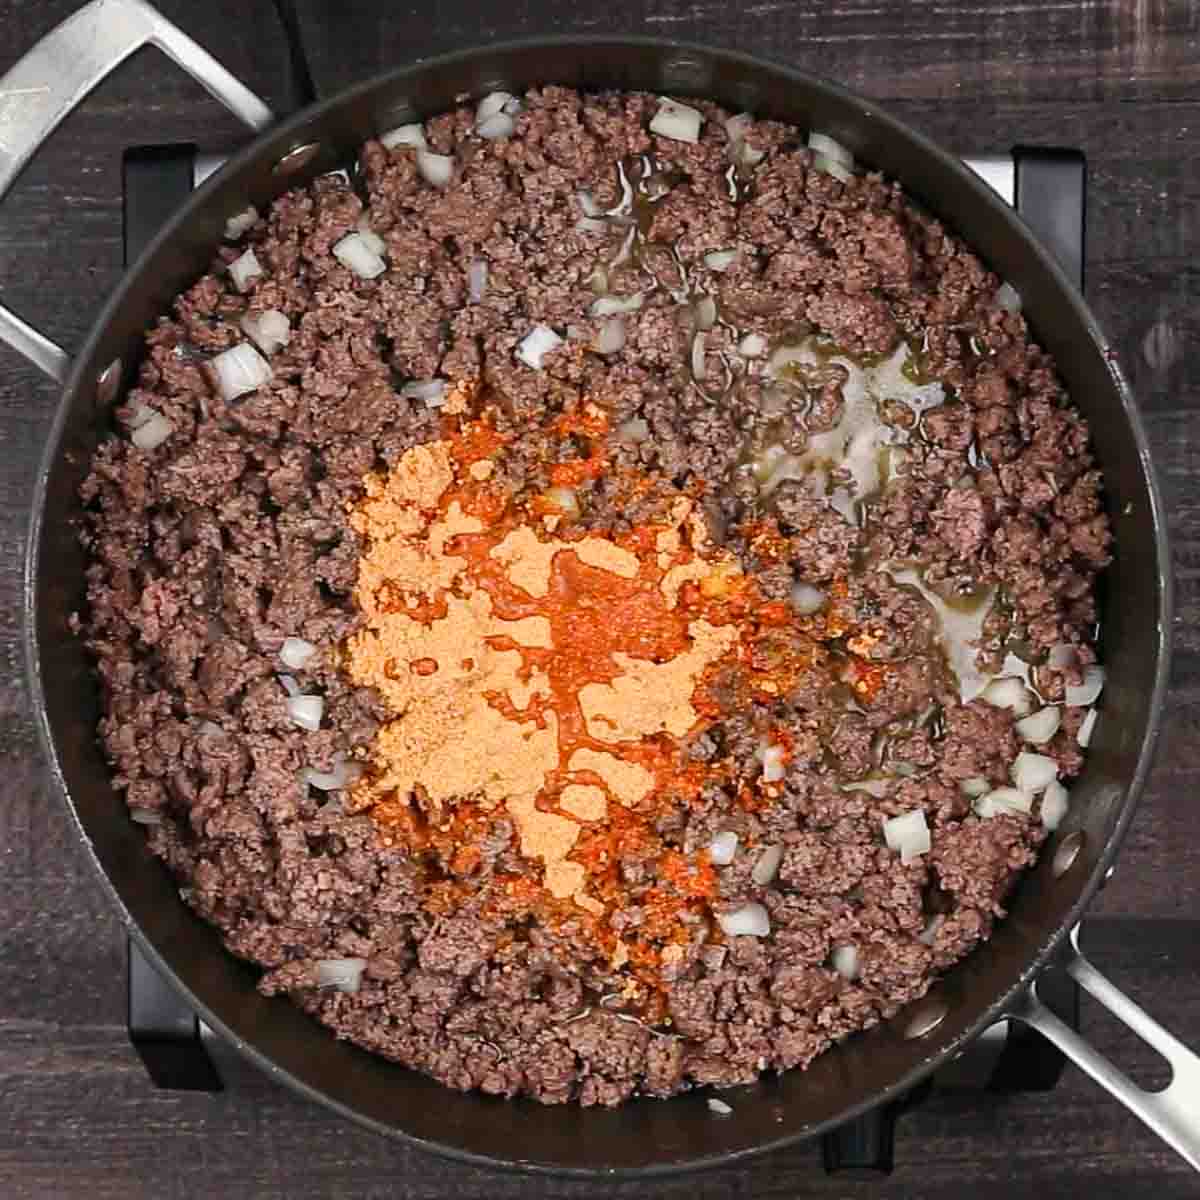 Ground beef in a pan with onions and spices for Beef Enchilada Casserole